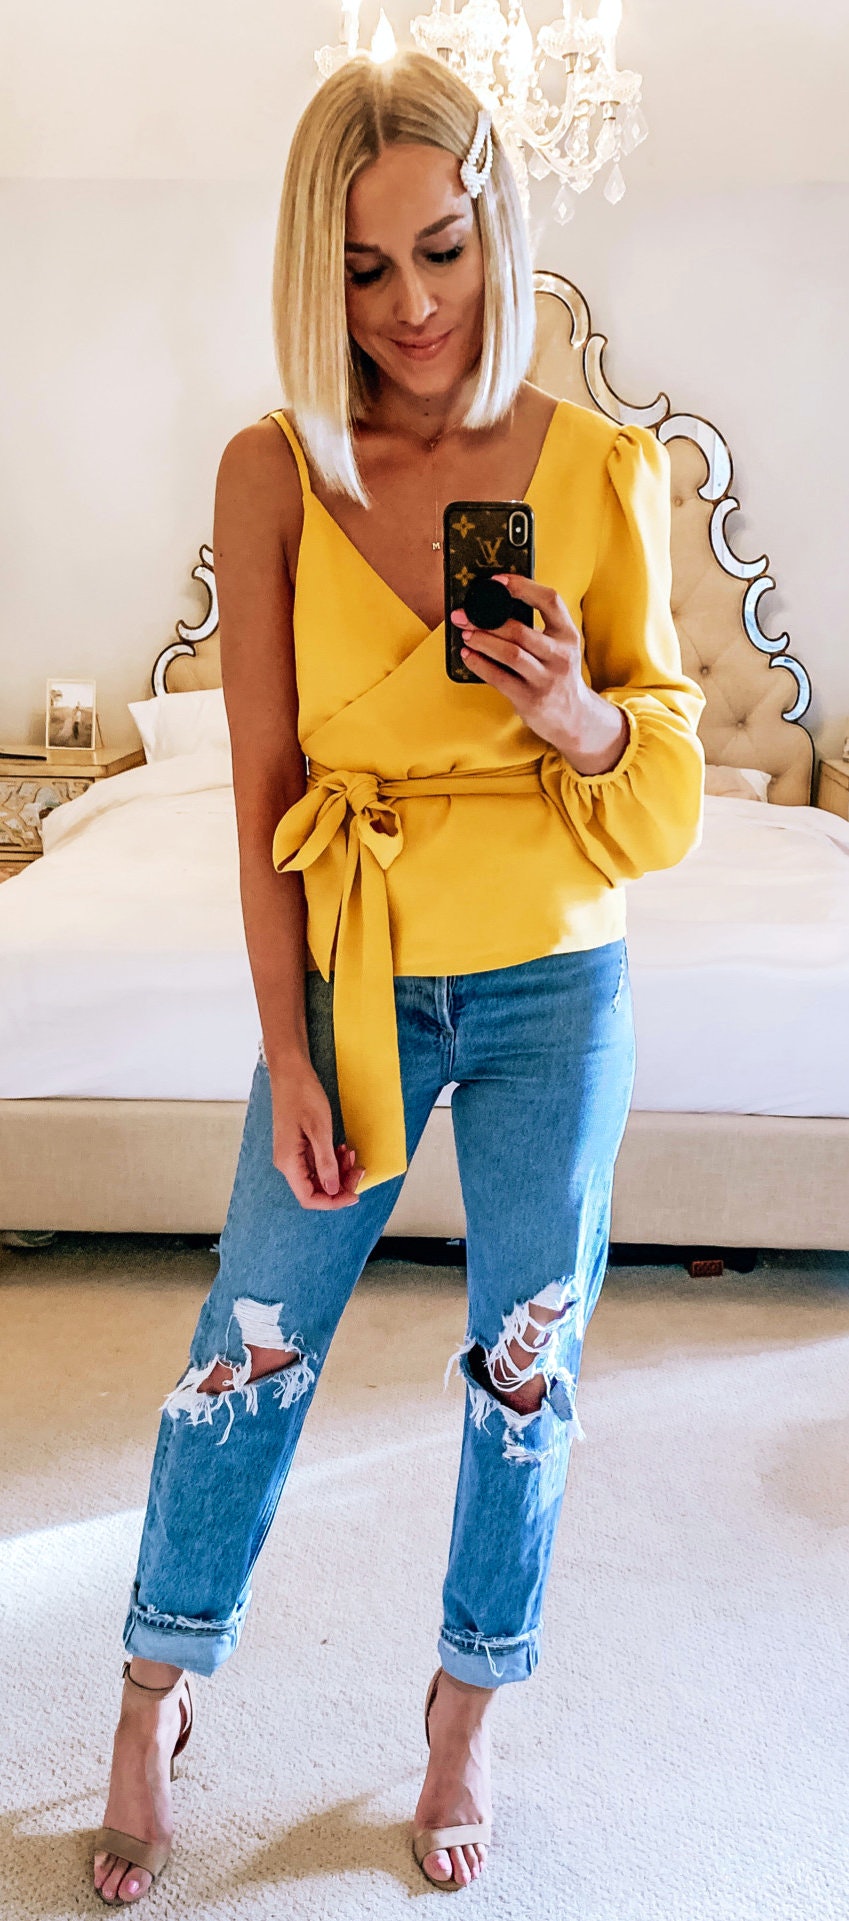 Brown high heels, distressed blue denim and yellow one-shoulder shirt.